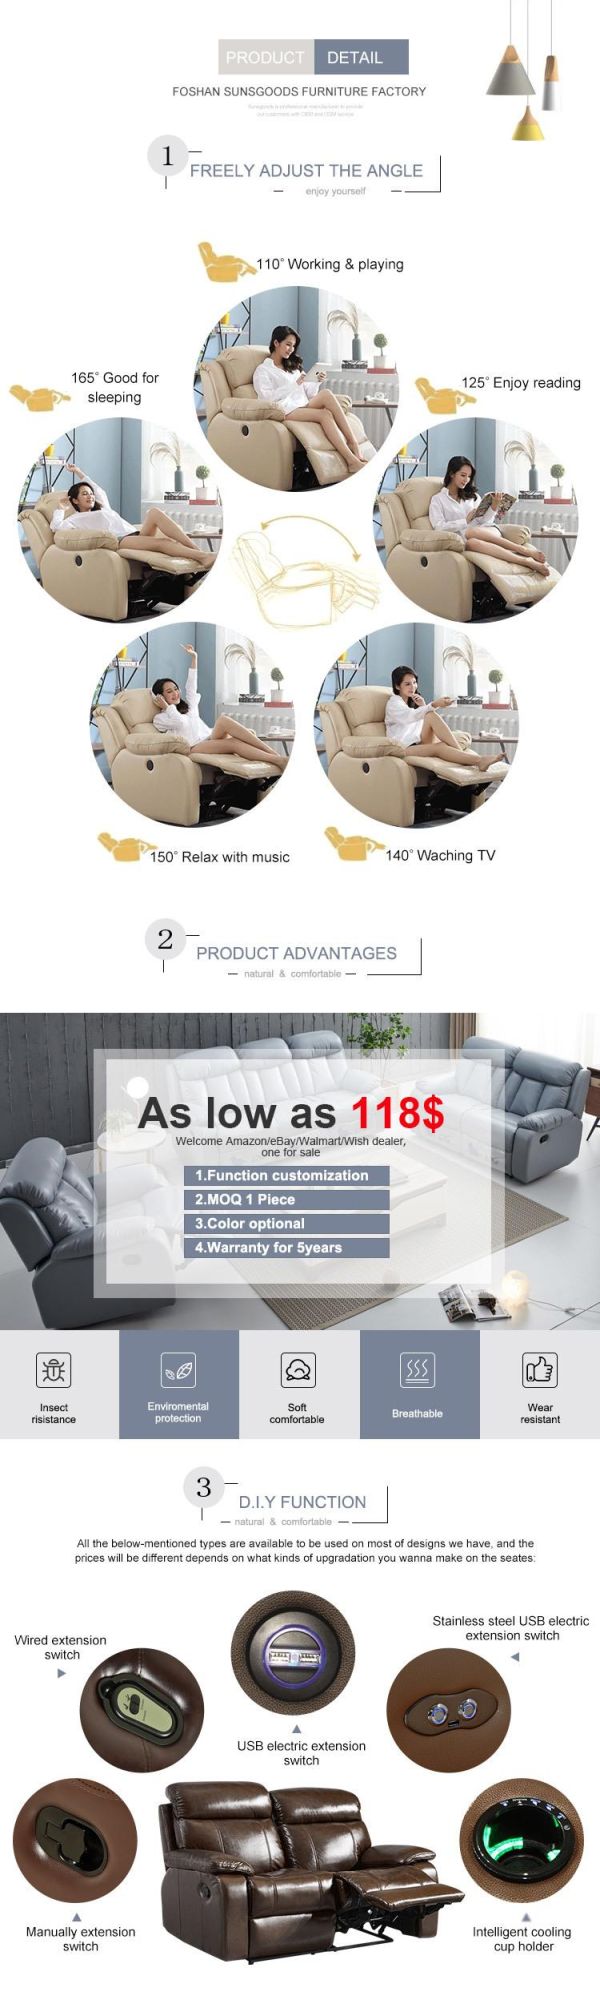 Chinese Furniture Home Leisure Recliner Sofa Living Room Furniture Reclining Leather Sofa Set